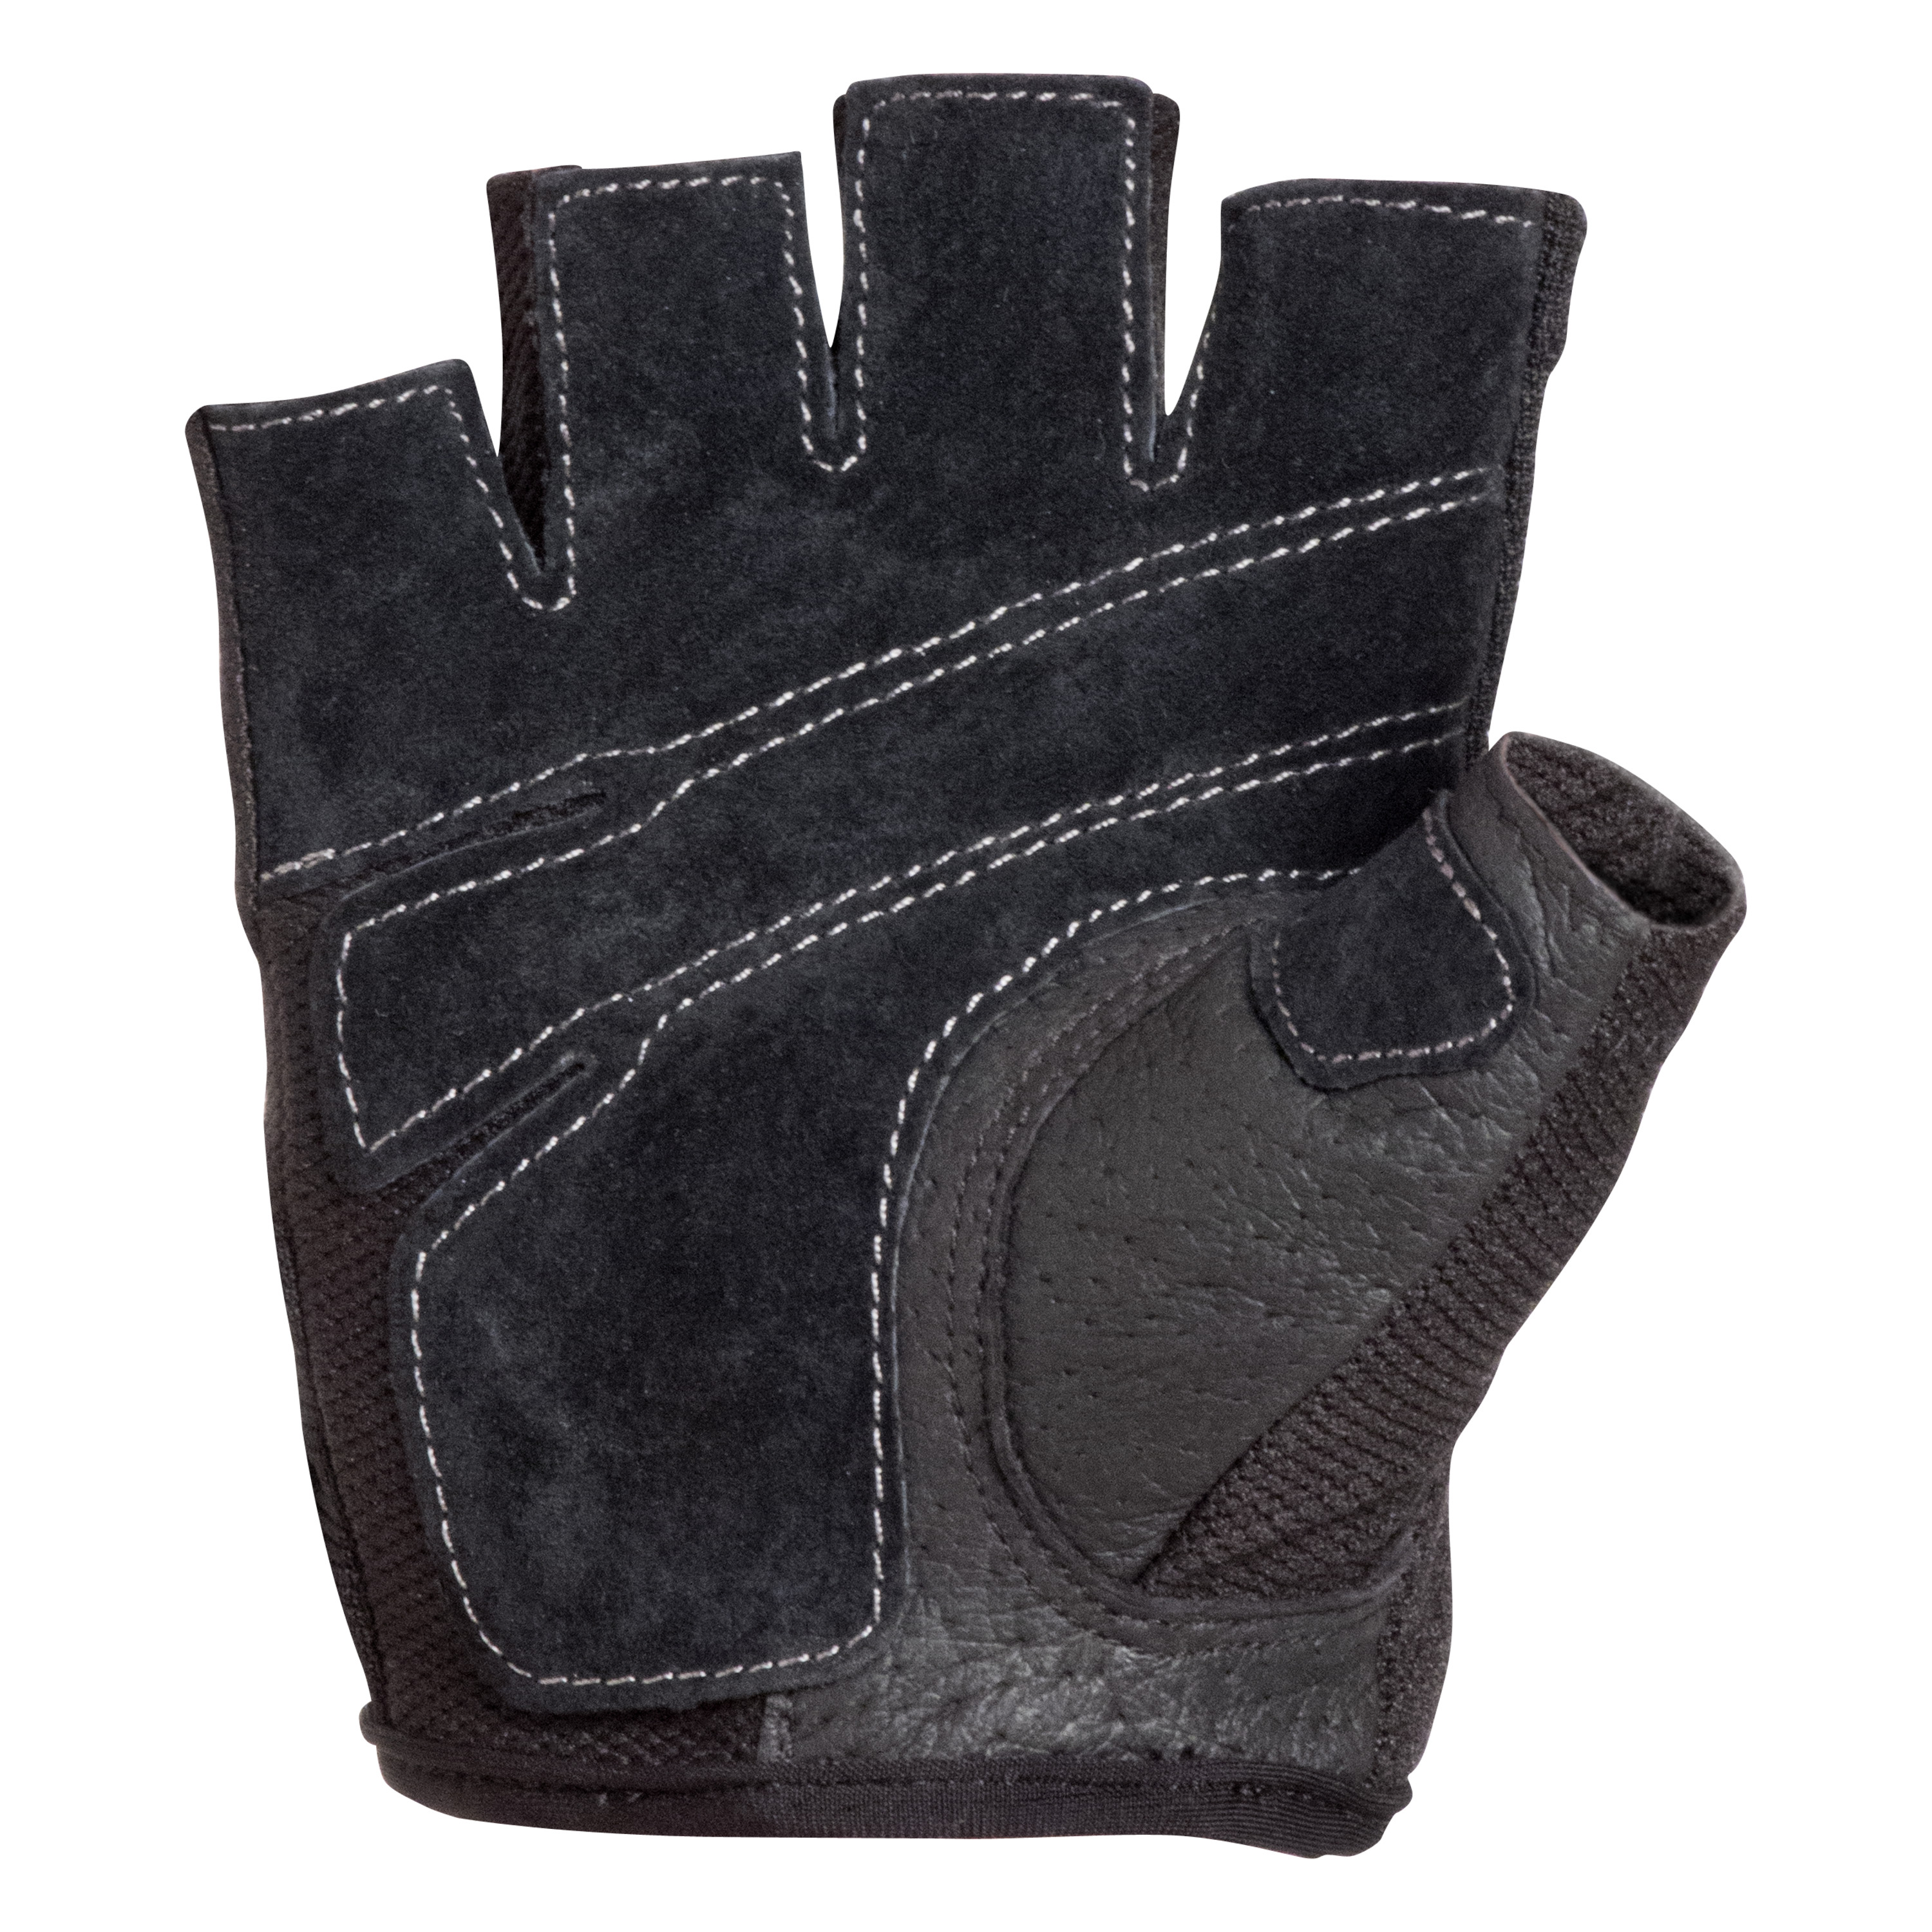 Harbinger Women's Power Weightlifting Gloves with StretchBack Mesh and Leather Palm (Pair) (2017 Model), Medium - image 5 of 5